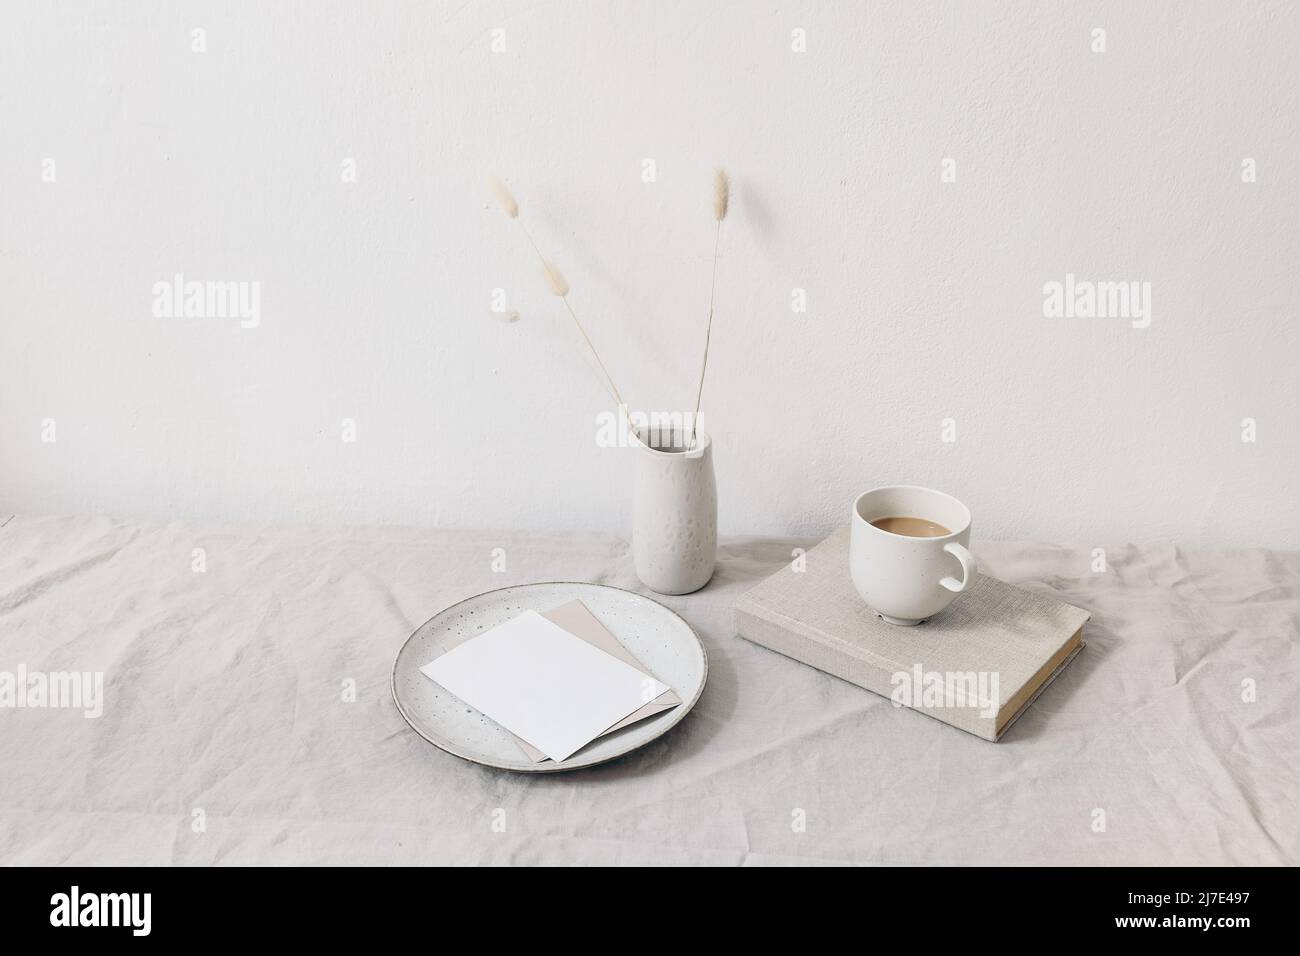 Neutral breakfast still life scene. Blank greeting card, ceramic plate. Vase with dry lagurus bunny tail grass on book. Cup of coffee on book. Linen Stock Photo